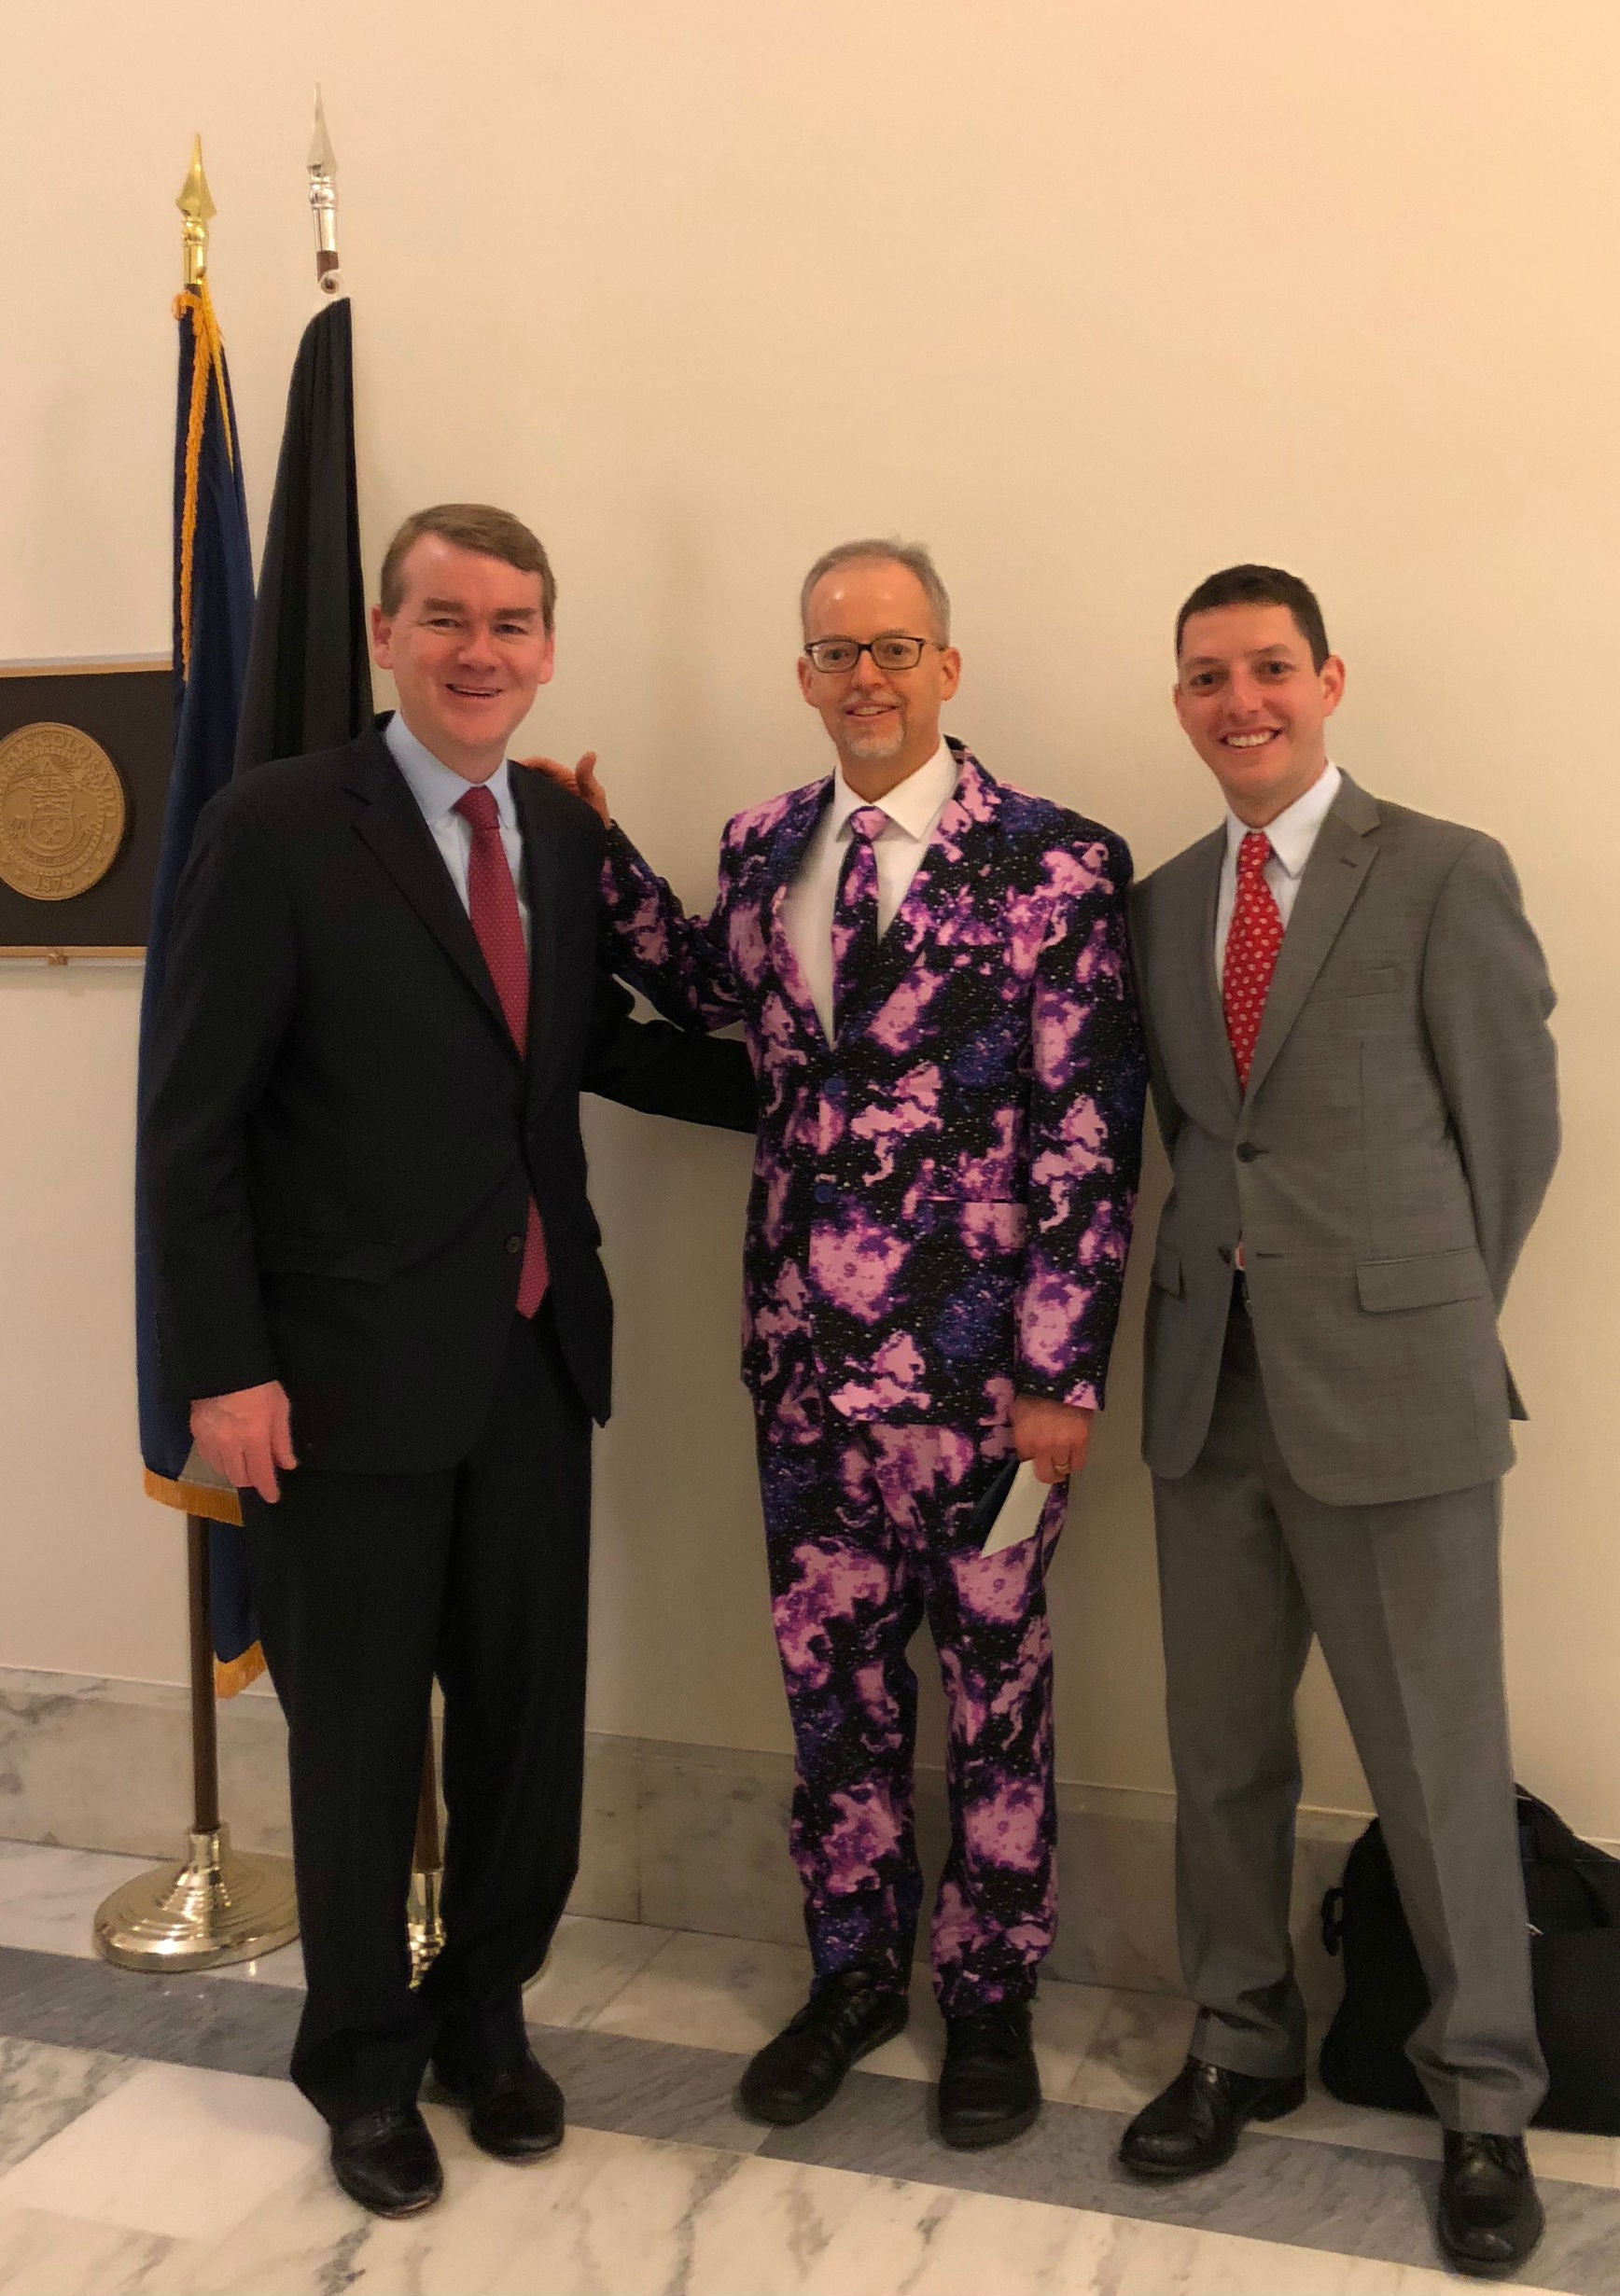 Chris Koehler & Brian Sanders of the Colorado Space Grant Consortium (COSGC) with Senator Michael Bennet on the Hill